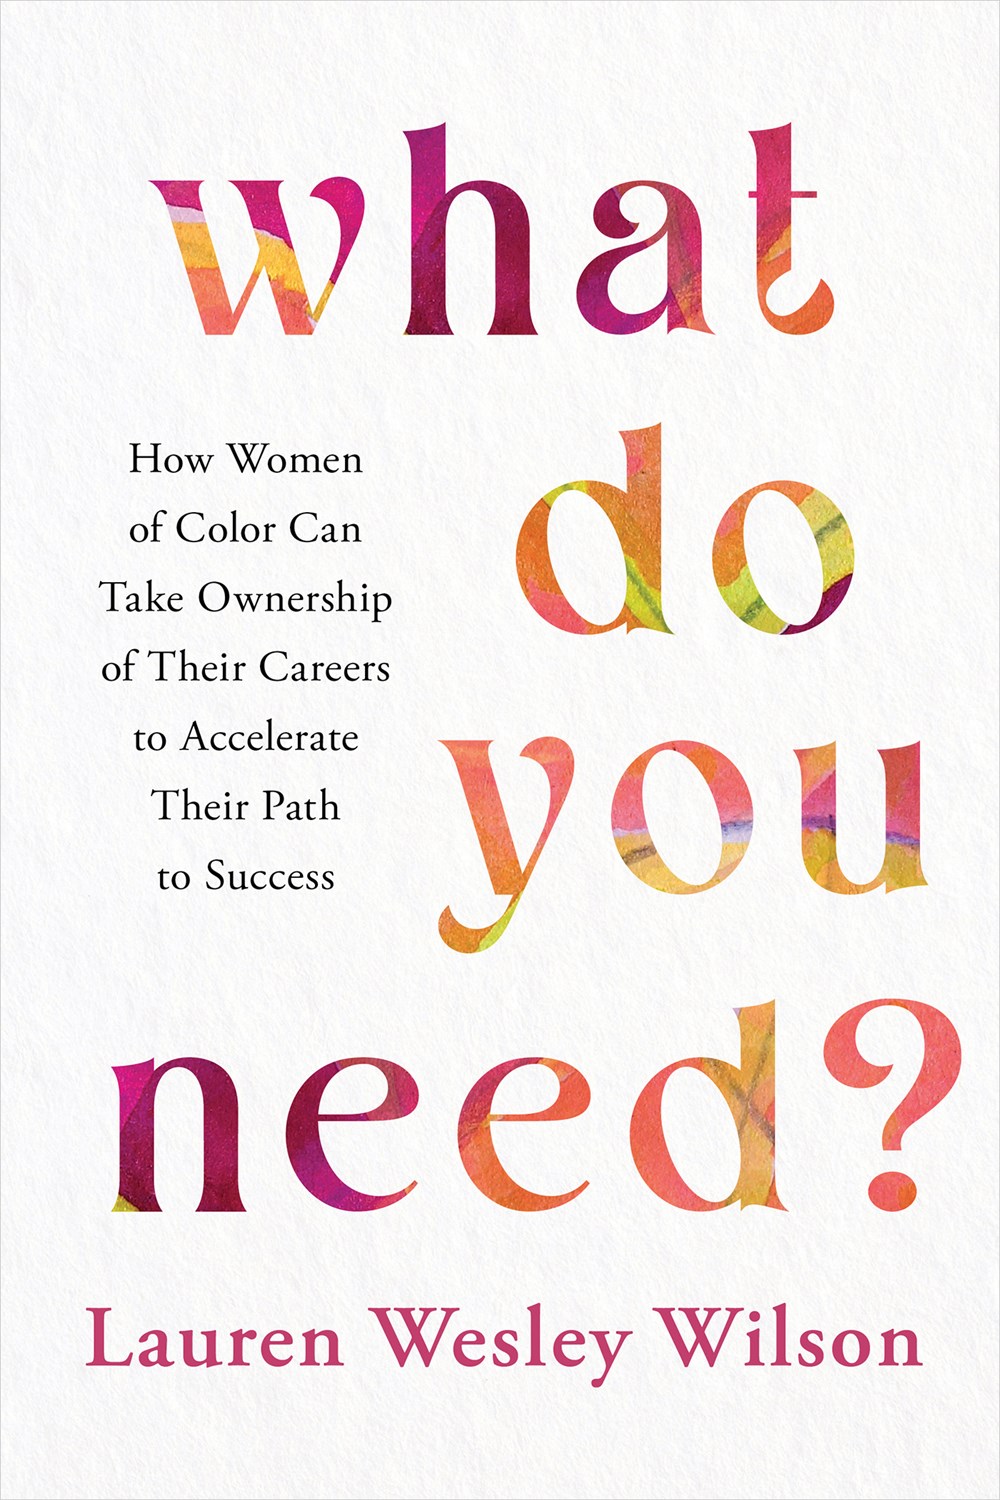 What Do You Need?: How Women of Color Can Take Ownership of Their Careers to Accelerate Their Path to Success